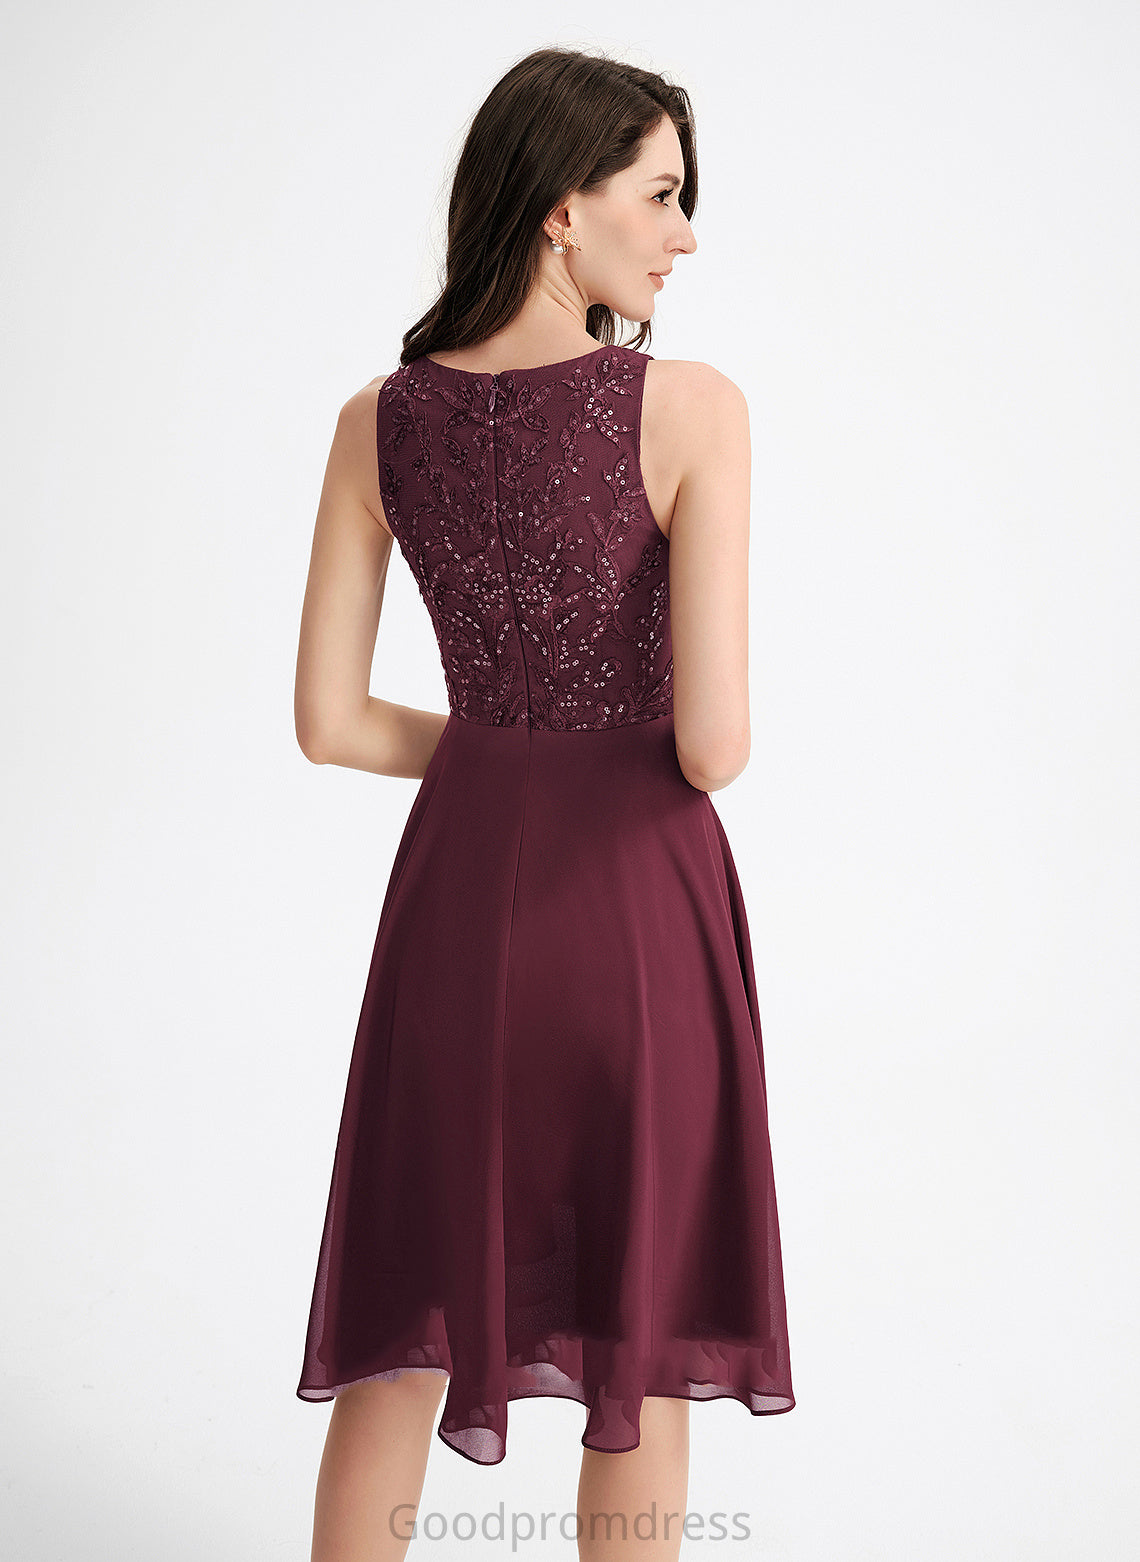 Dress Neck Gertrude Scoop Homecoming With Chiffon Lace Sequins Asymmetrical Homecoming Dresses A-Line